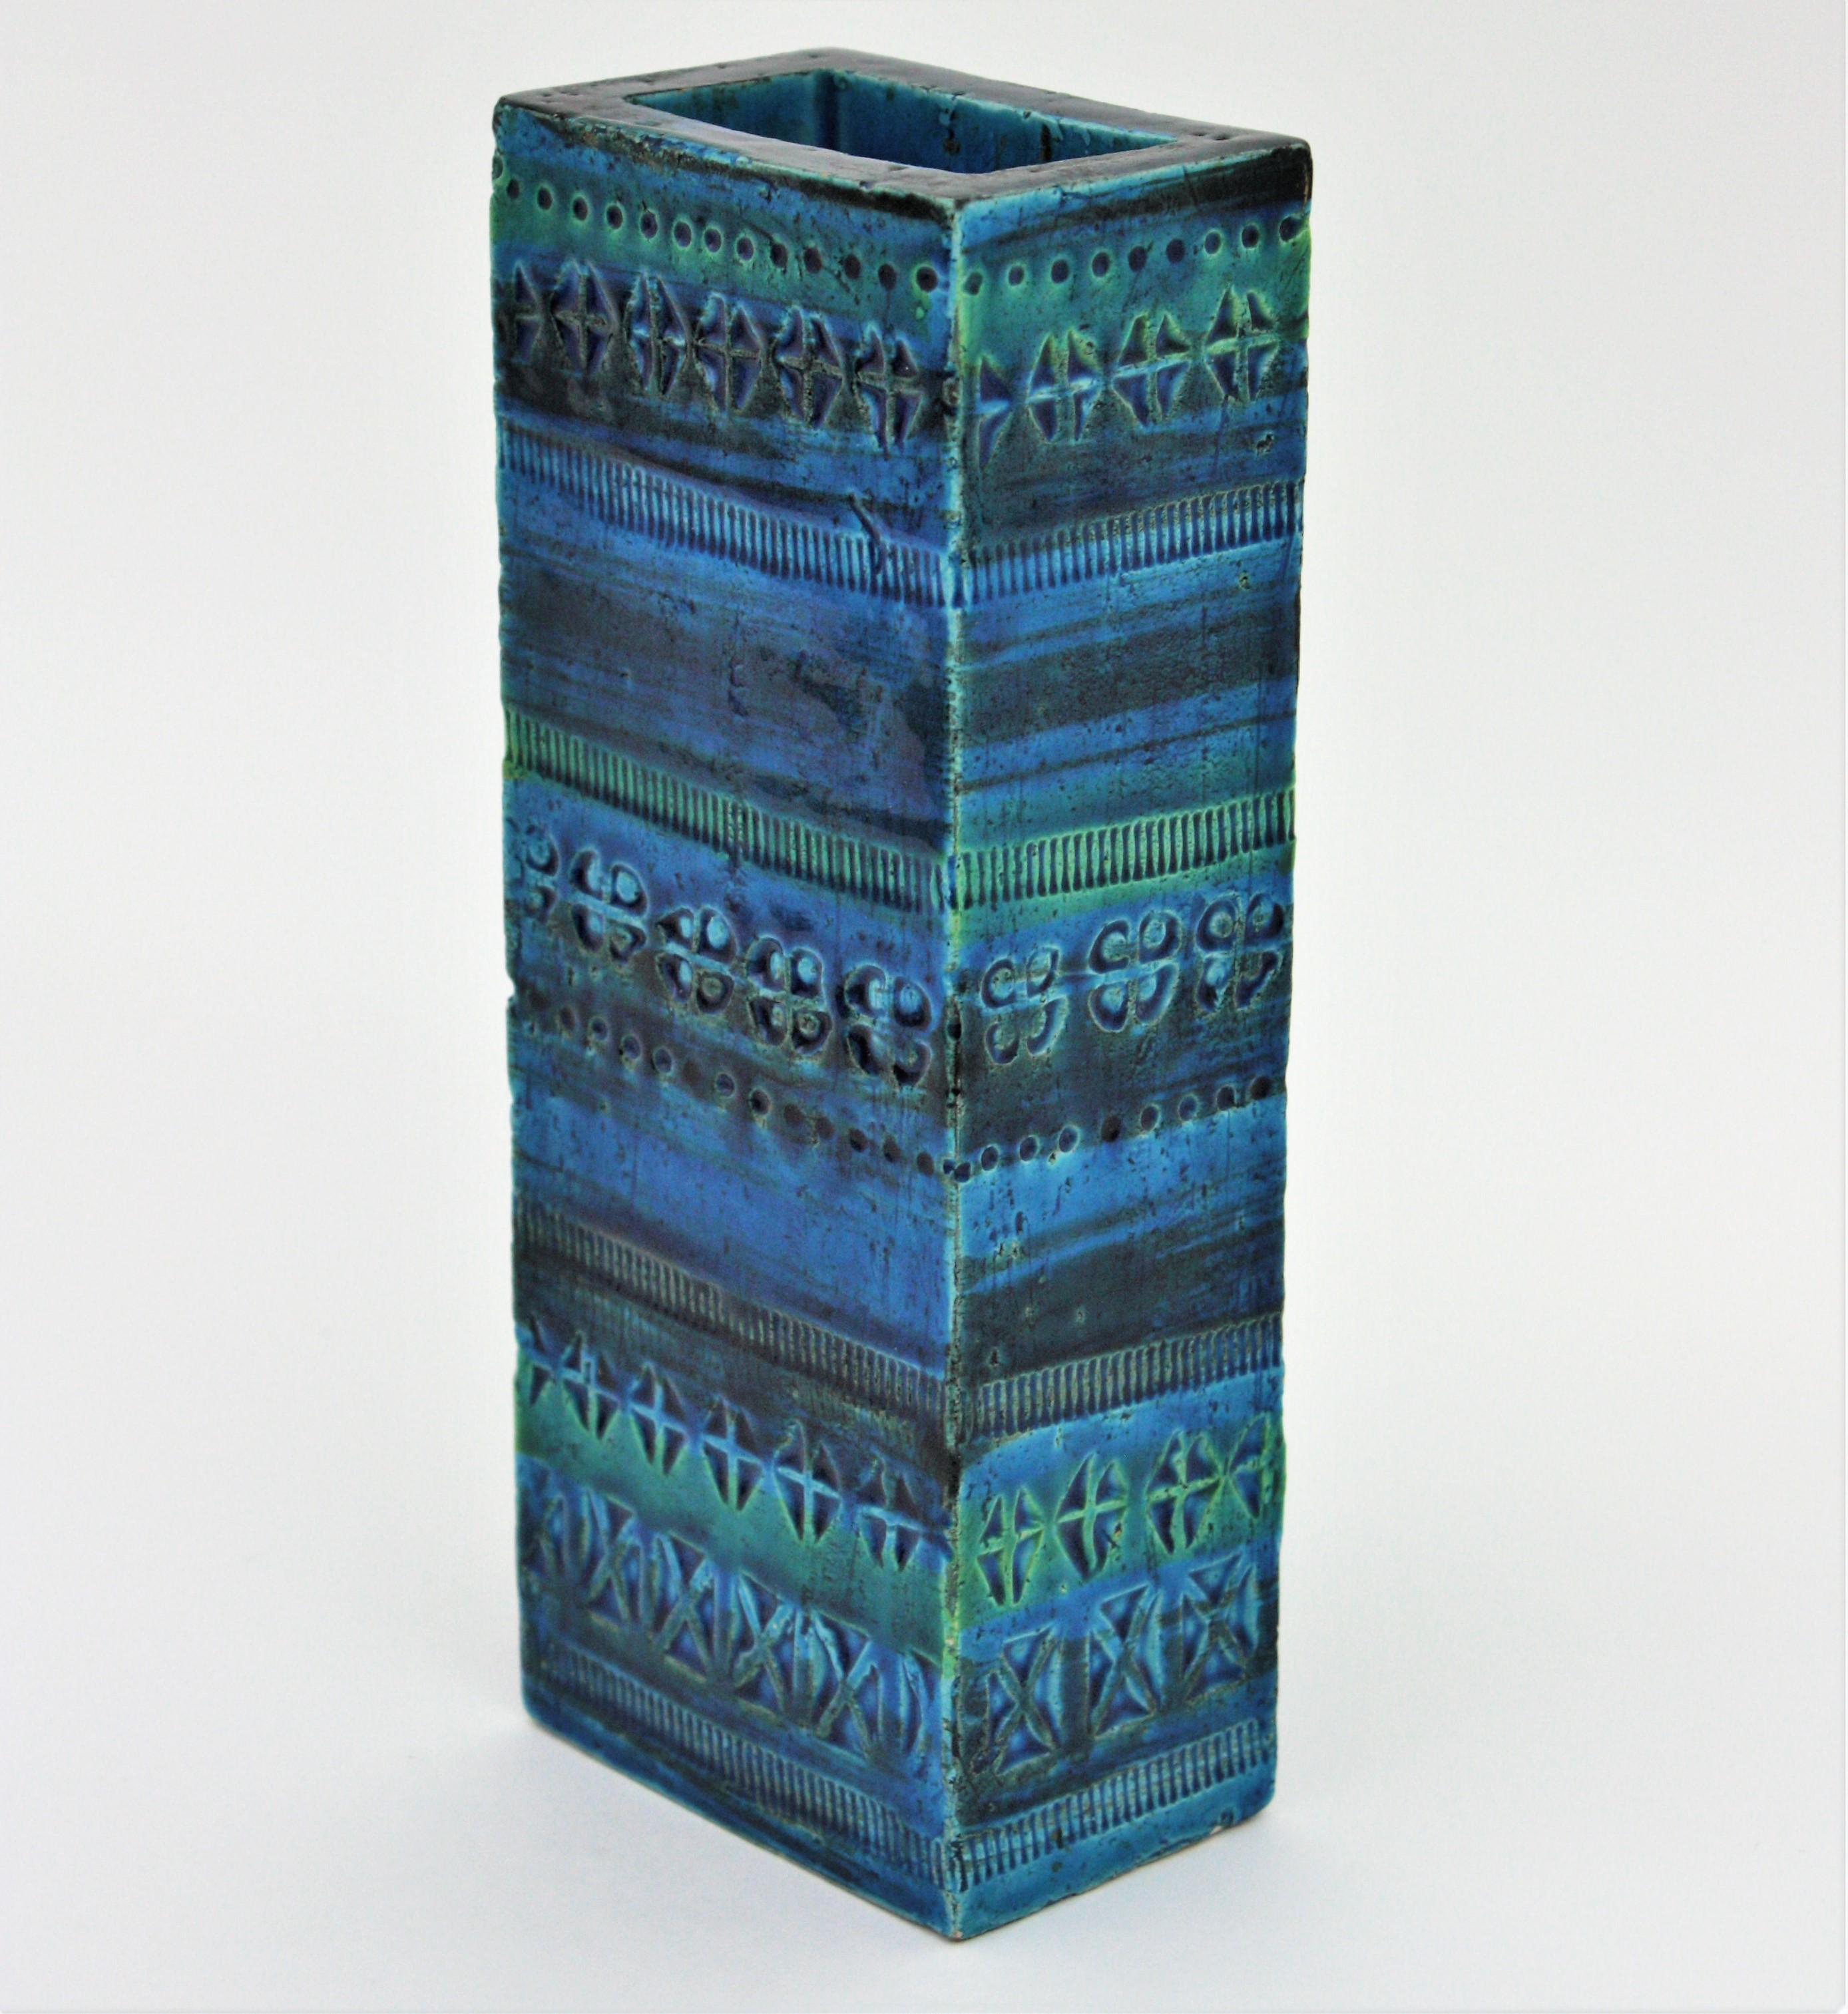 Unusual Mid-Century Modern blue glazed ceramic (Rimini Blu) rectangular vase, Italy, 1950-1960s.
Designed by Aldo Londi and manufactured by Bitossi. Handcrafted in Italy with hand carved geometric design in a glazed vibrant turquoise and cobalt